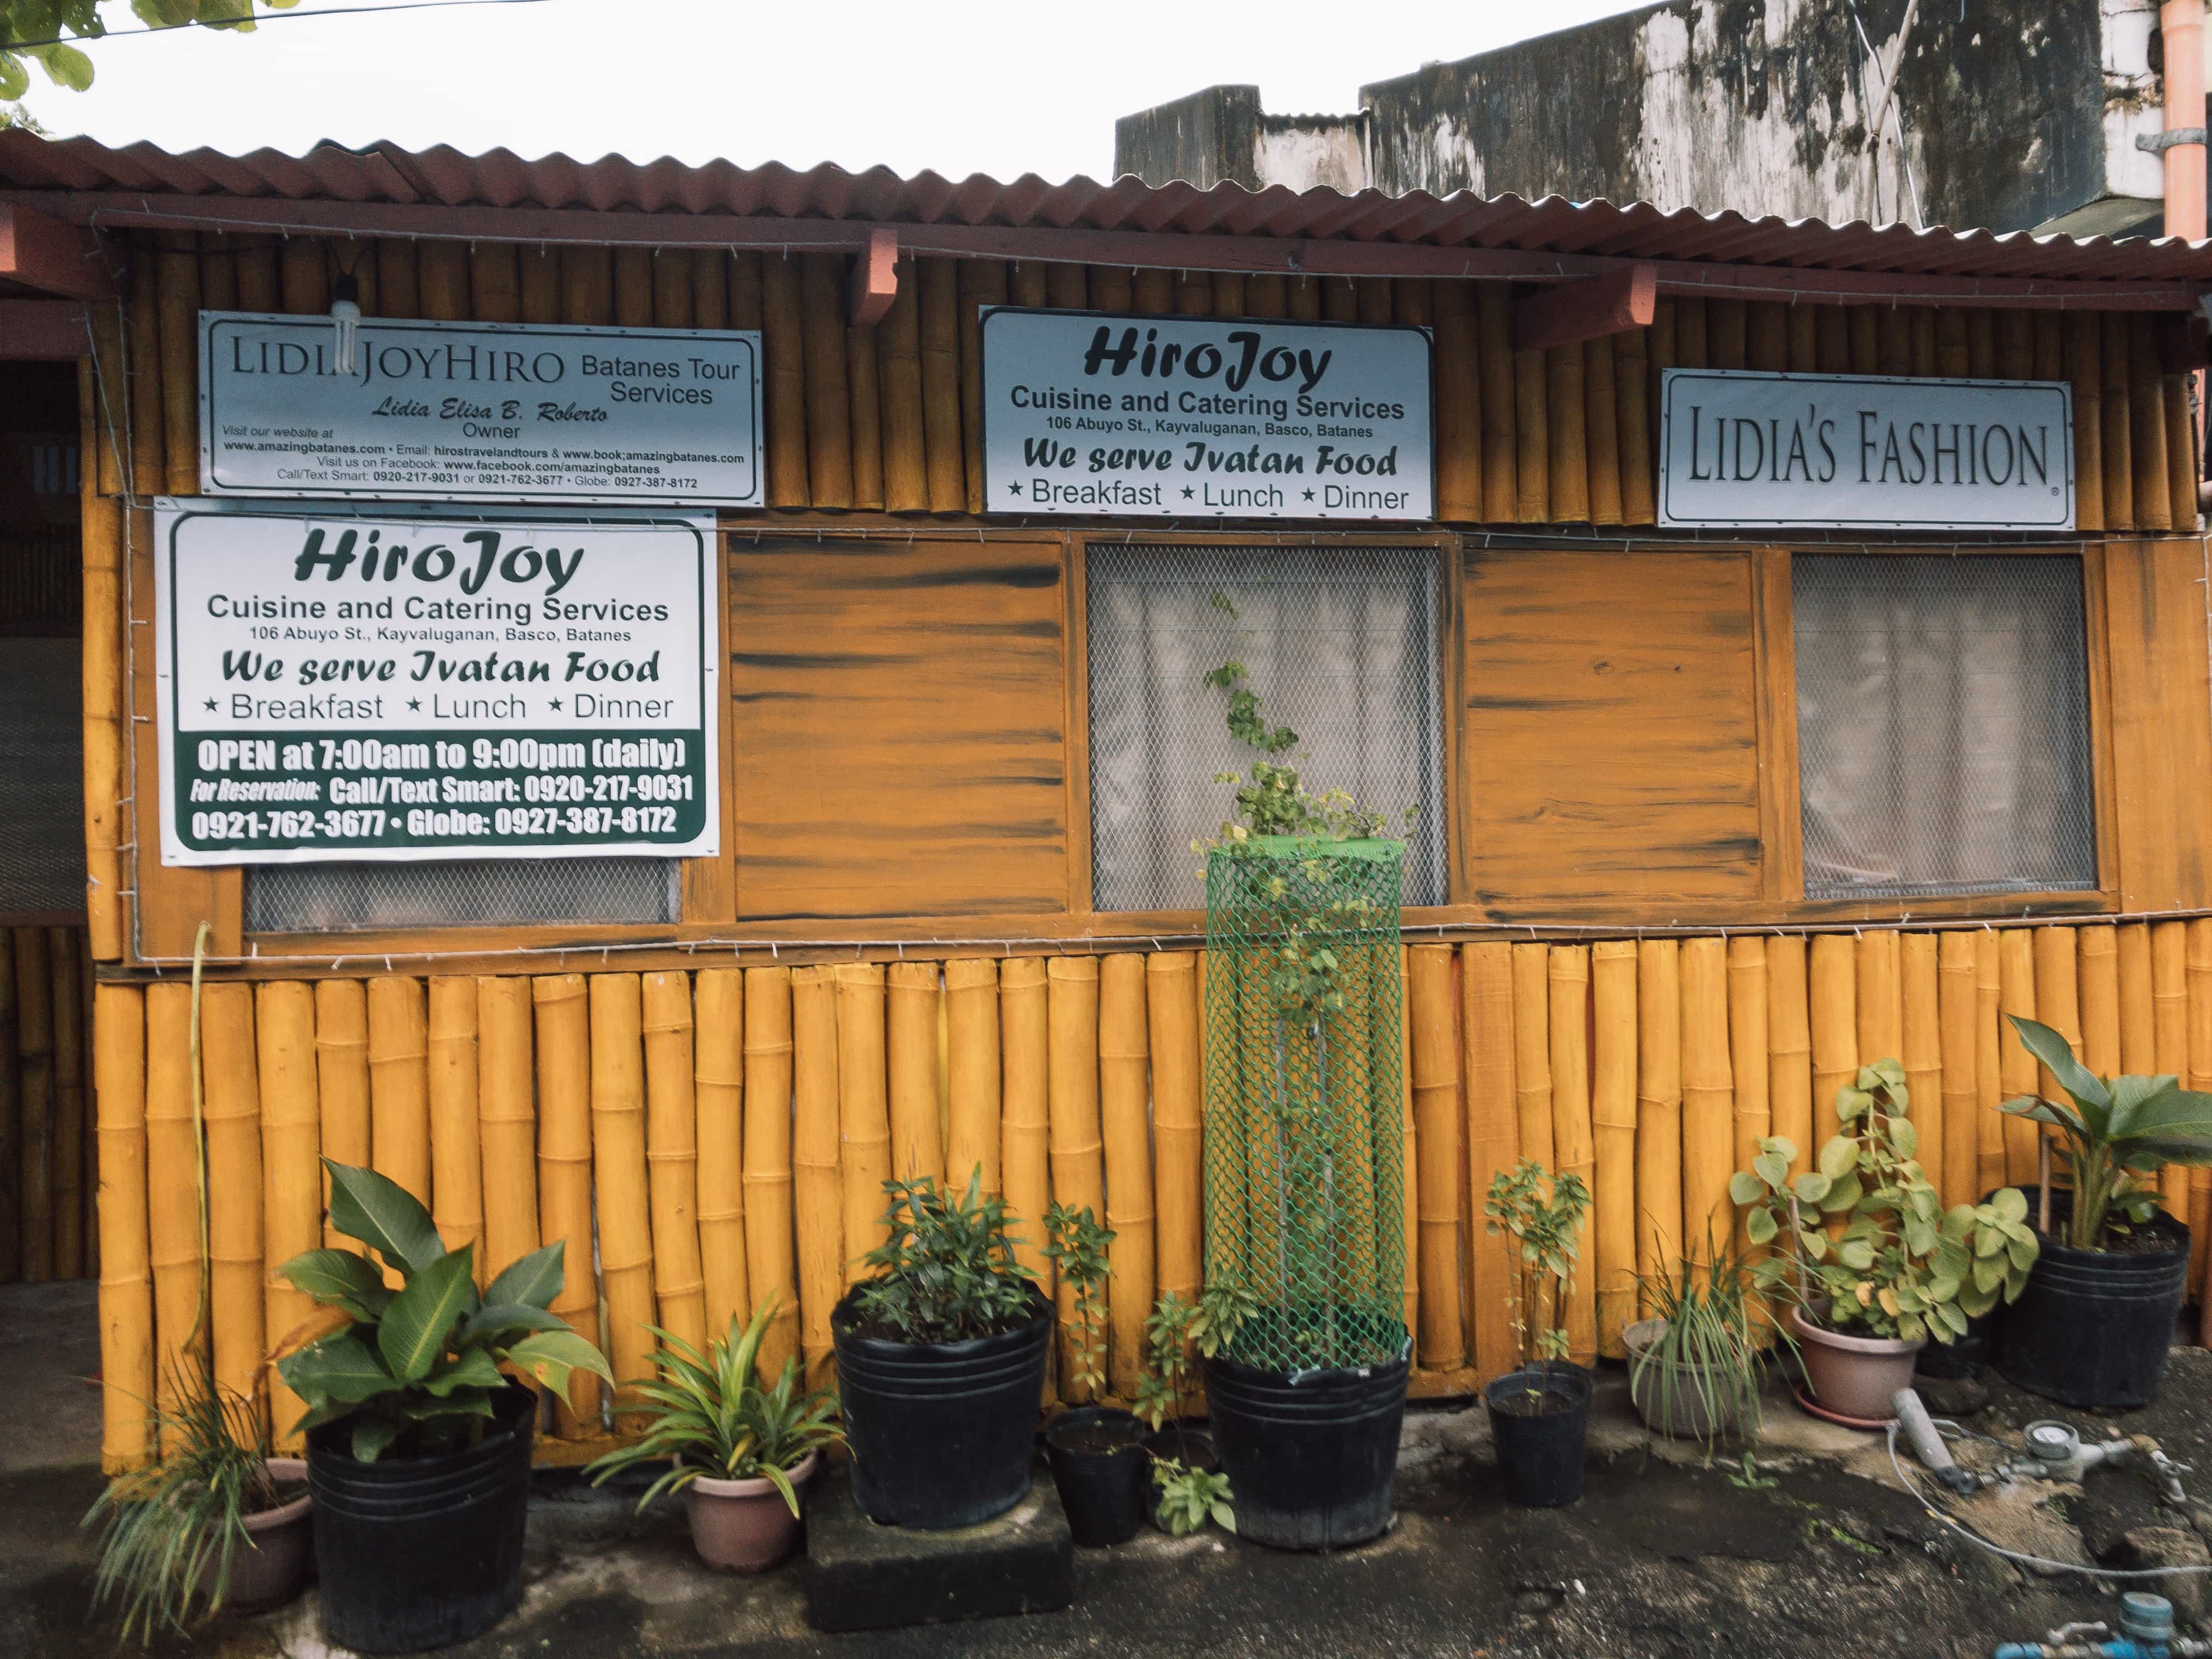 hiro Joy cafe in Batanes, food to try in Batanes, Transportation around Batanes, Batanes tourist spots, atms in batanes, wifi connection in batanes, how to go to Batanes, coconut juice